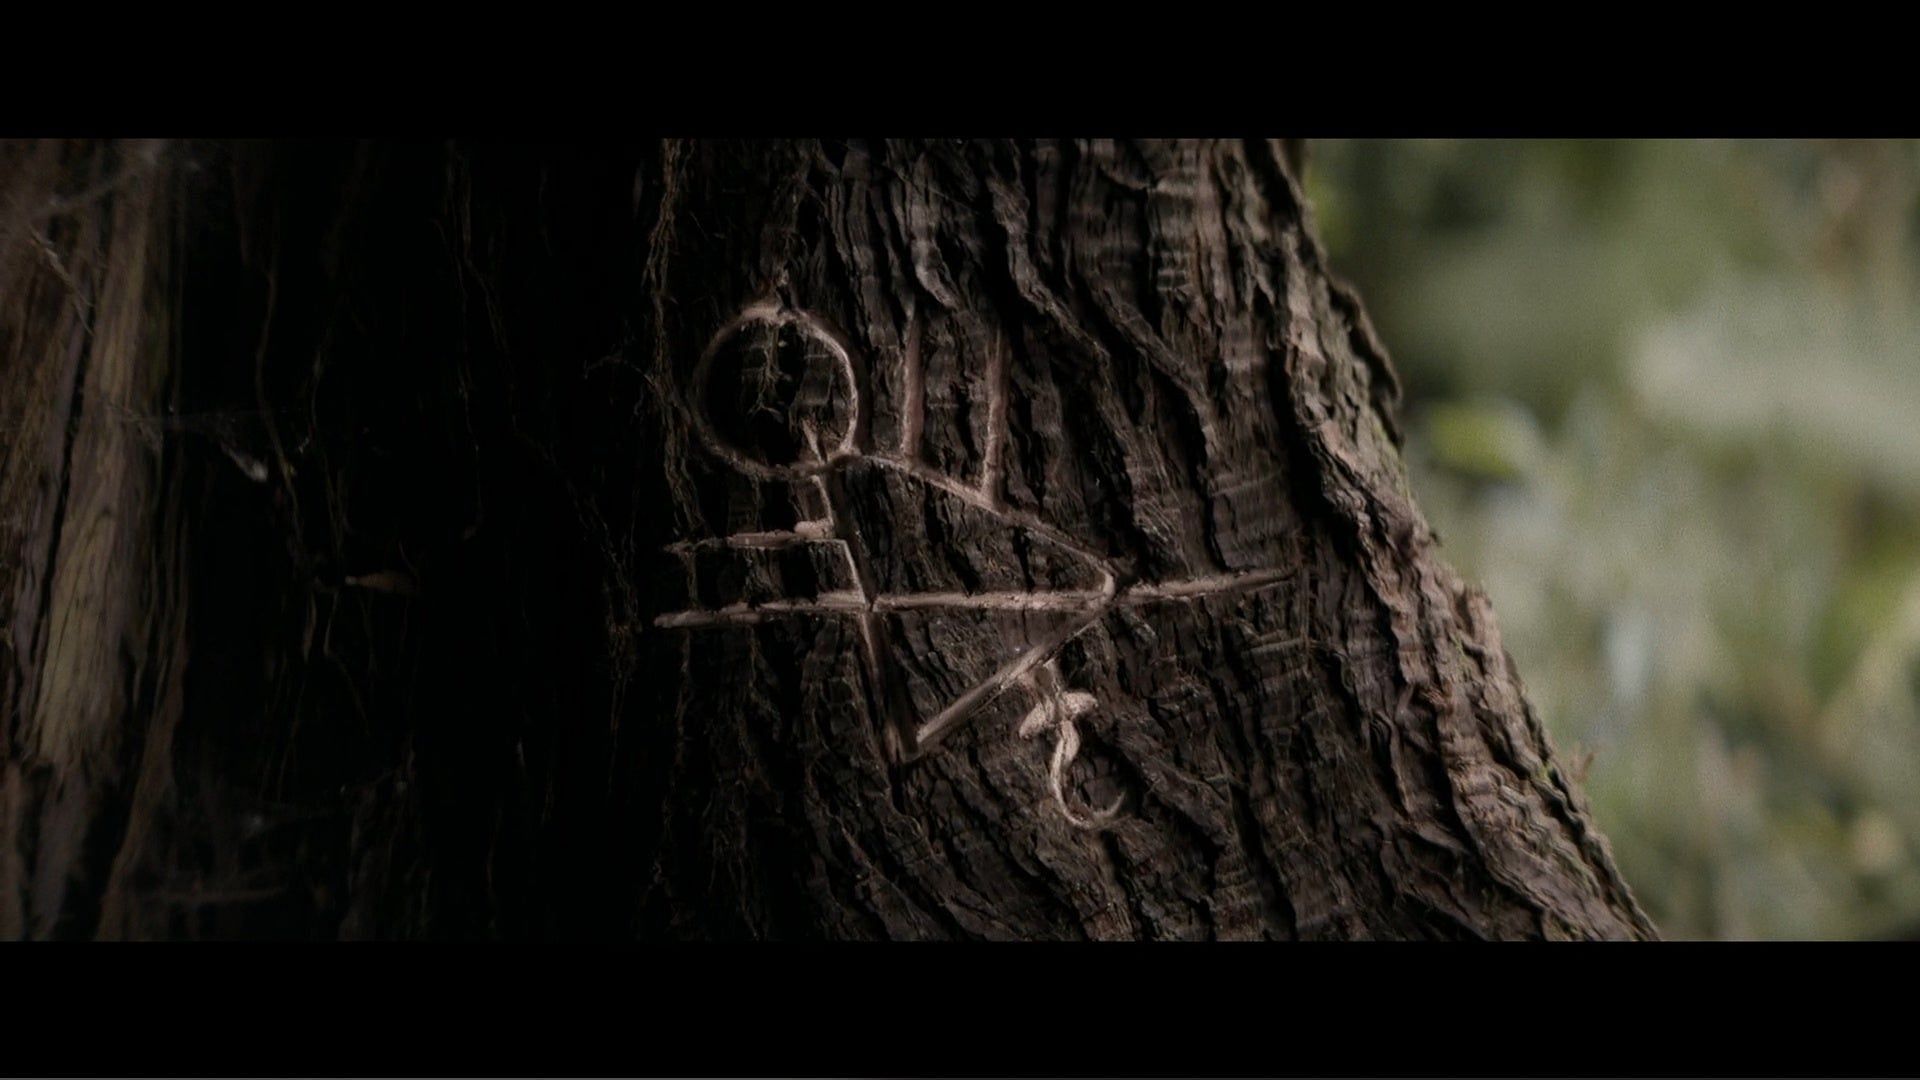 The symbol engraved on a tree in the crash site (Image via Showtime)